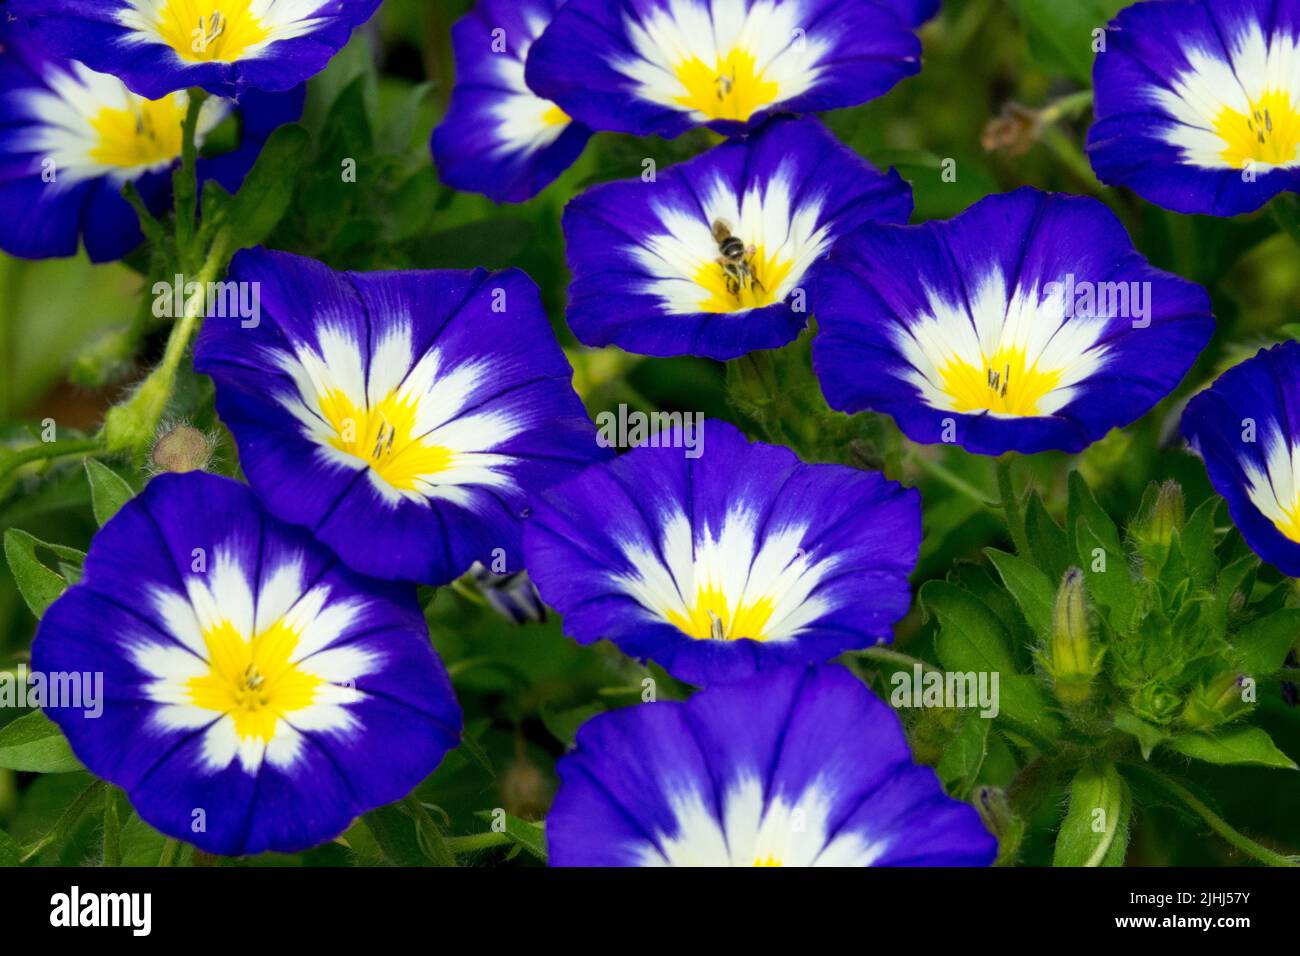 Annual, Summer, Plant, Blue white, Convolvulus 'Blue Ensign', Dwarf Morning Glory Stock Photo